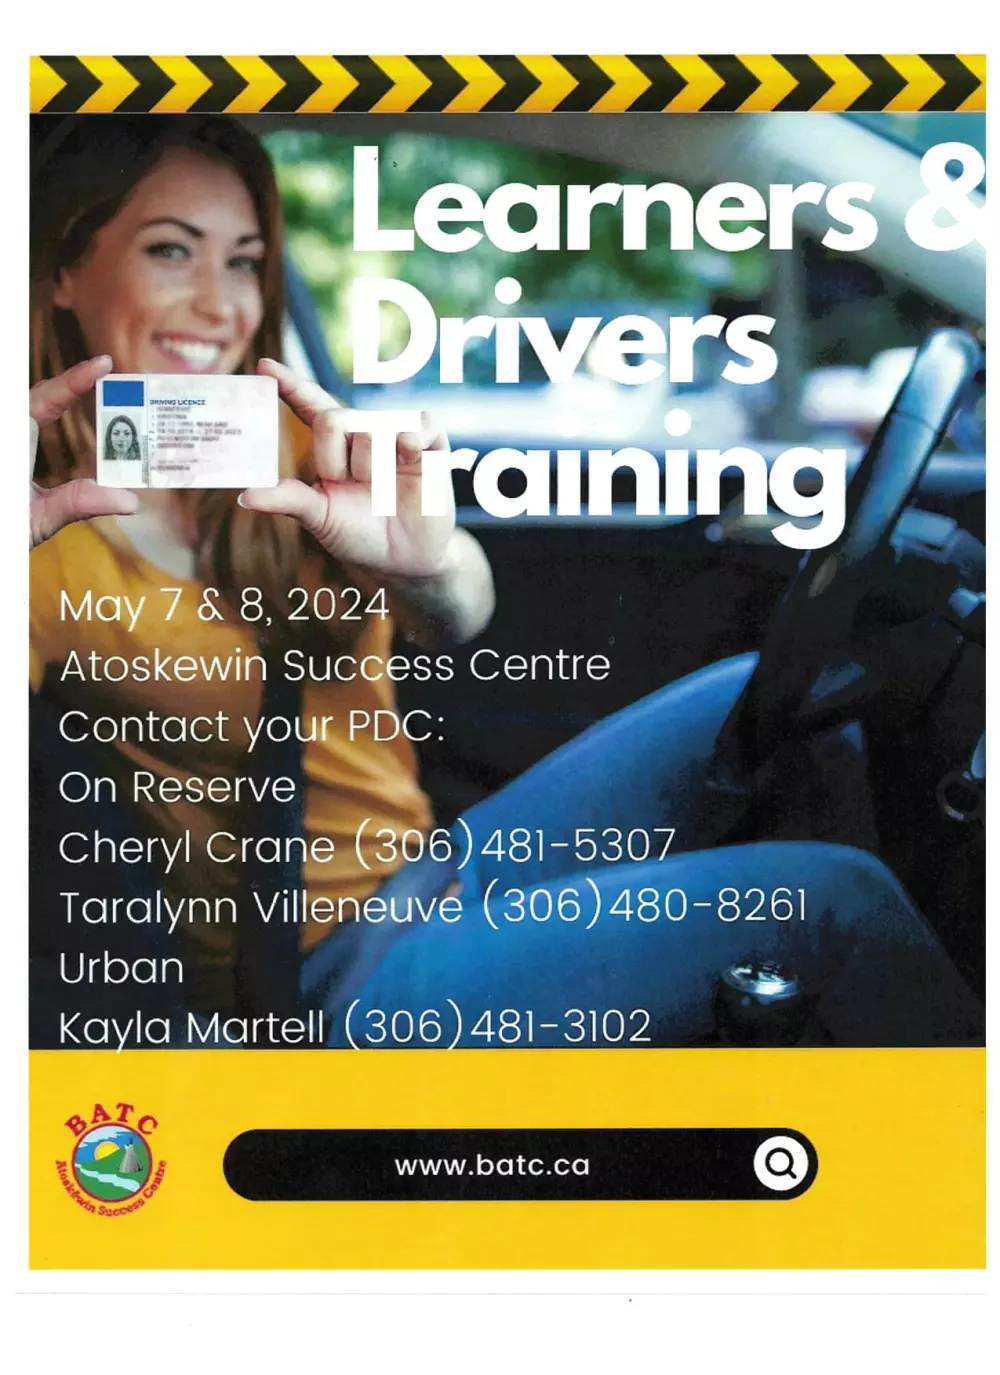 Atoskewin Learners & Drivers Training